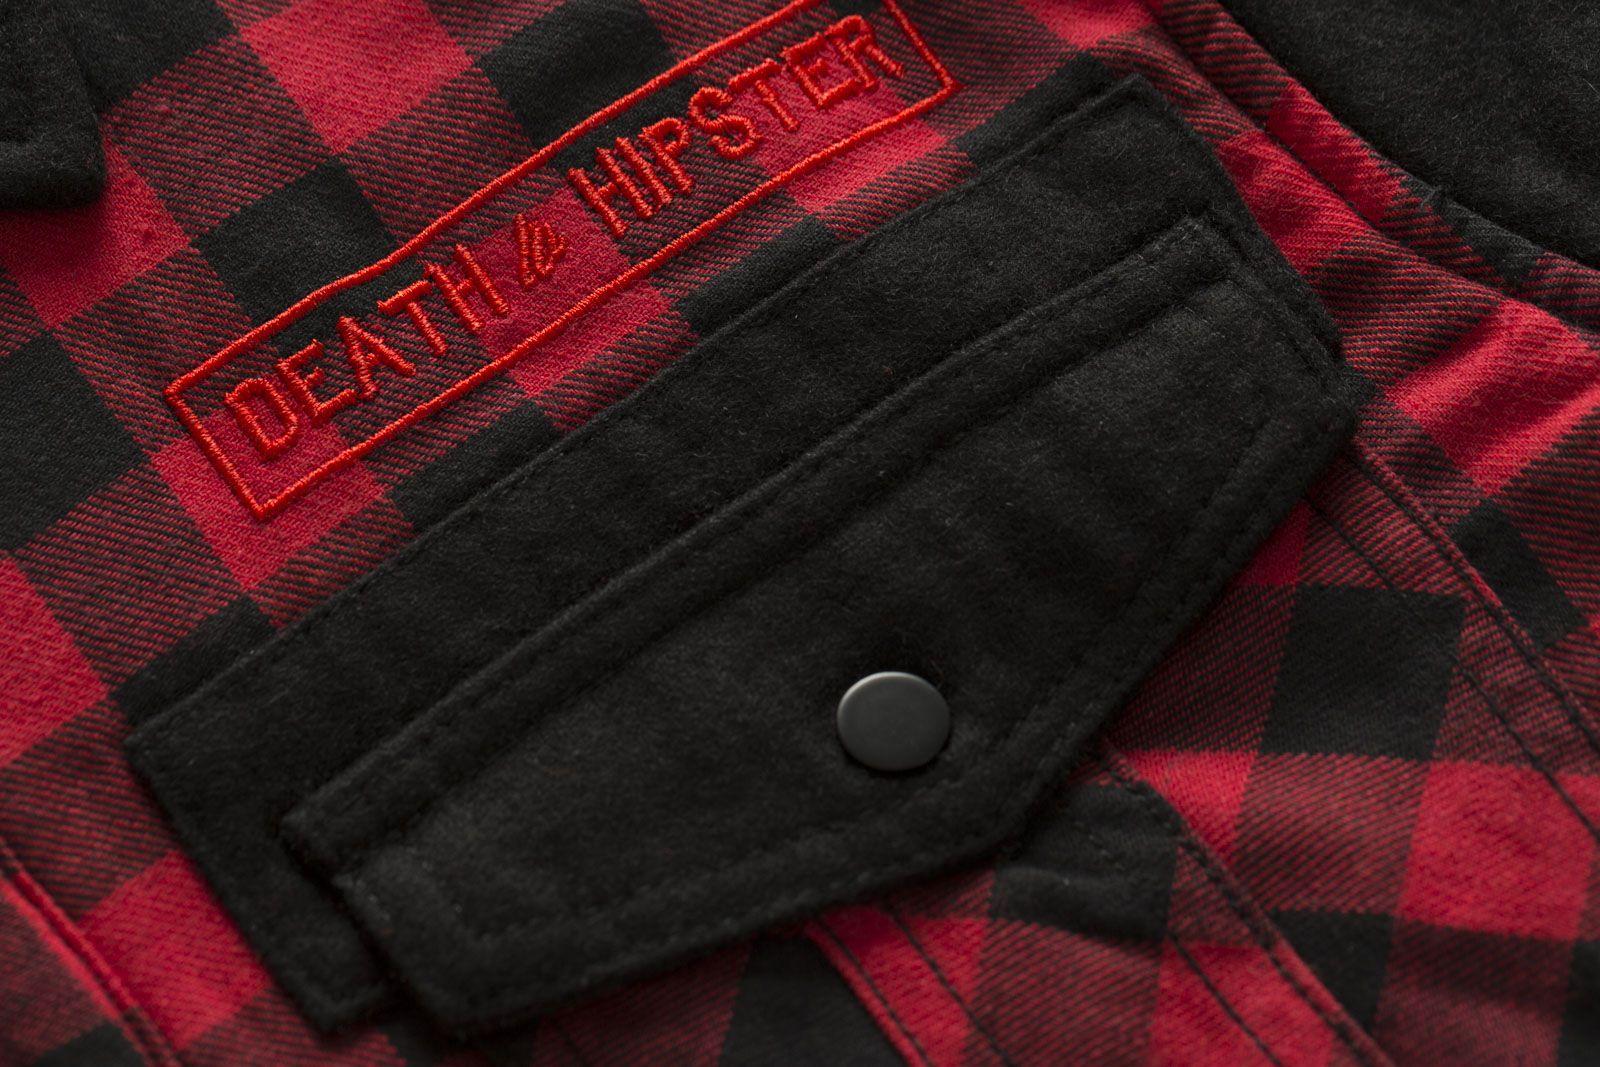 Red and Black Square Logo - Hyraw Jacket Black Square with an embroidered skull